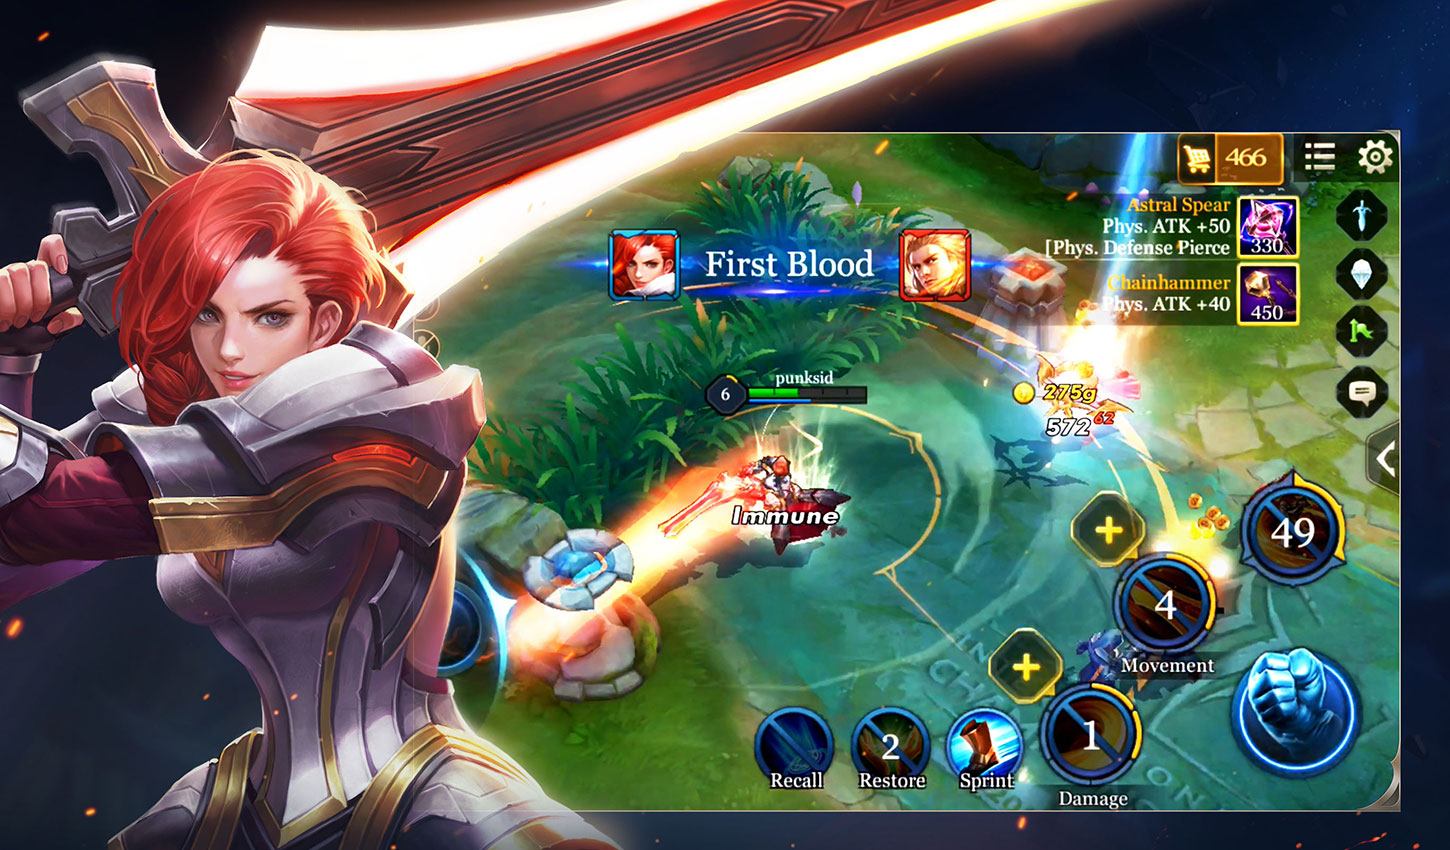 U.S. Arena of Valor Revenue Reaches $5 Million as Tencent Increases Focus  on Western Markets